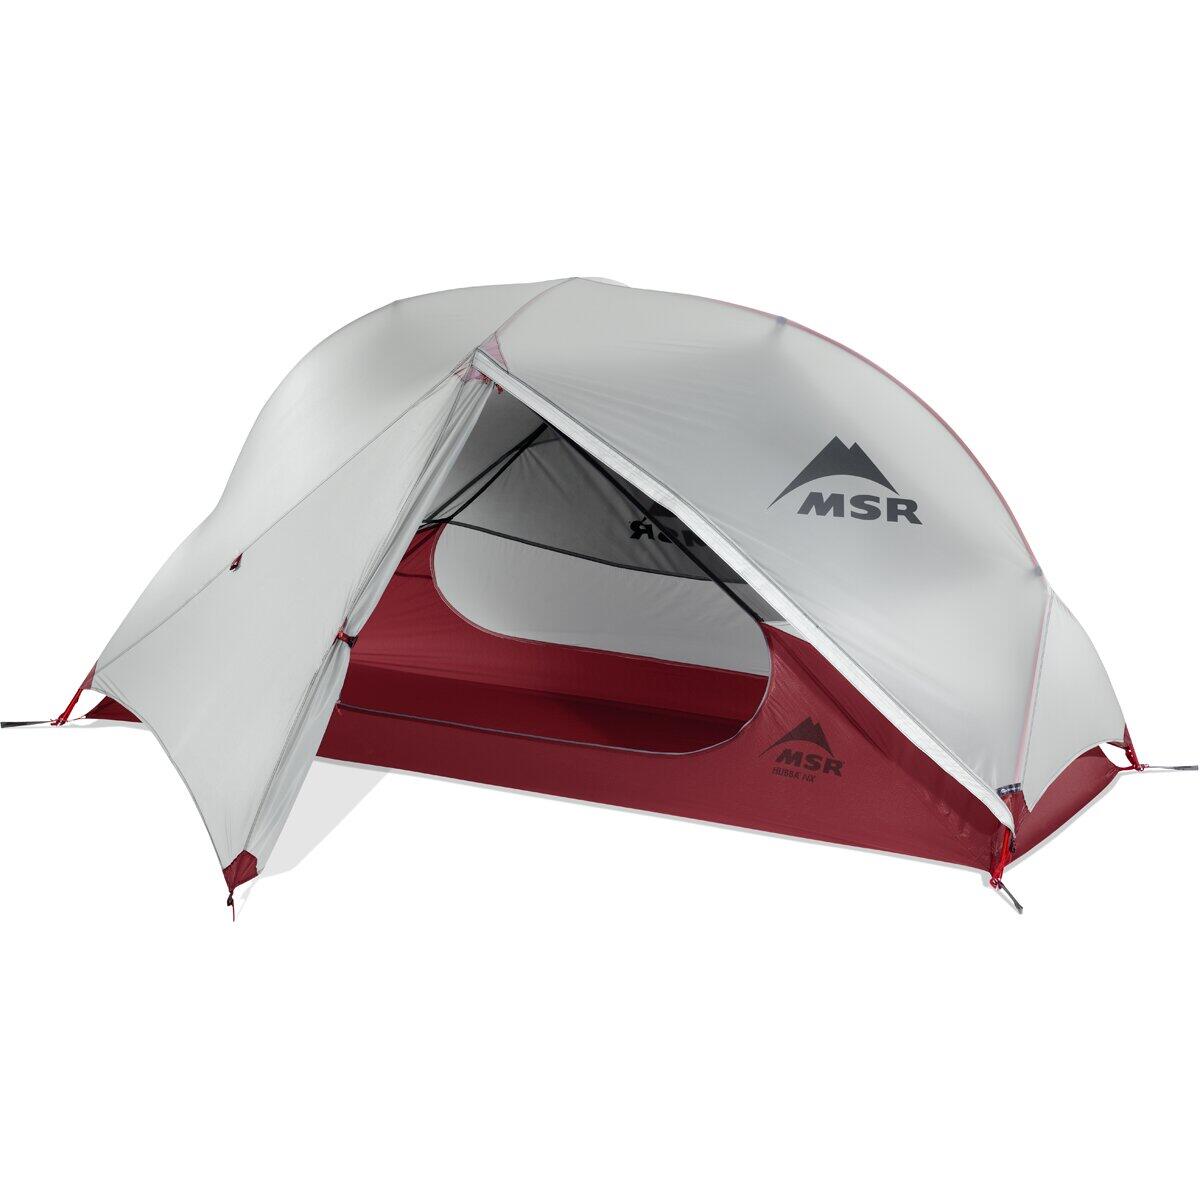 MSR MSR Hubba Nx Solo Backpacking Tent Gray